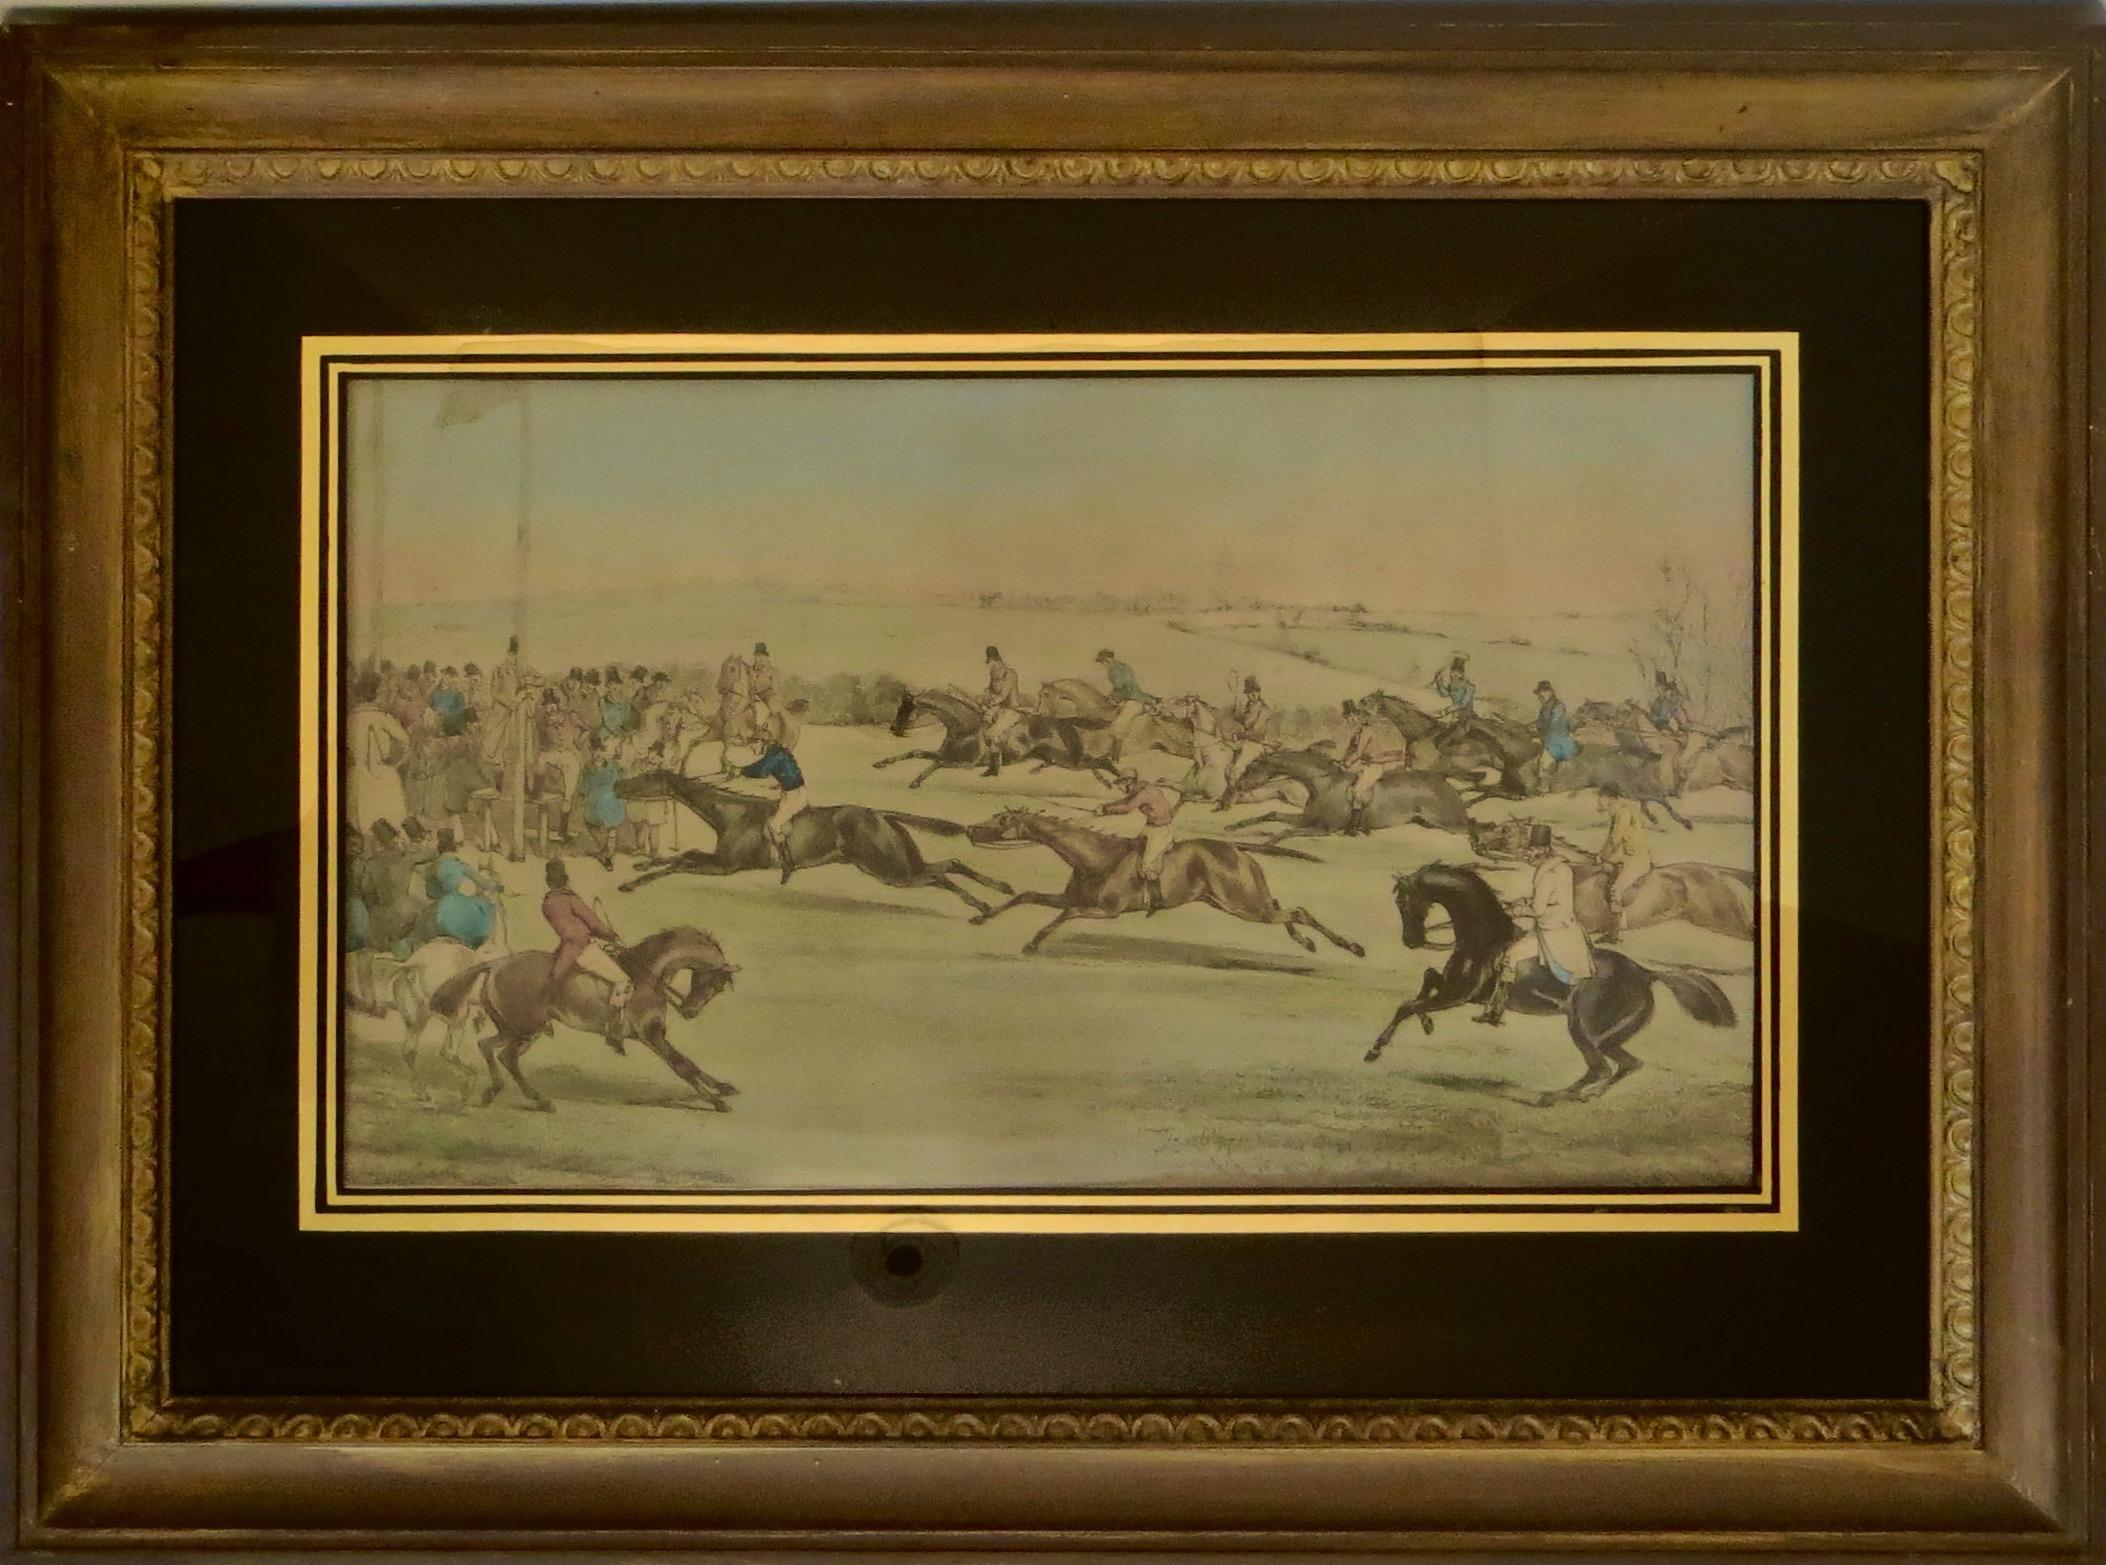 Wonderful polychromed lithograph under glass with reverse glass hand painted gold gilt rectangular double lined border, along with a hand painted black matte; unique; I have not seen this before. Scene is full of action depicting a country Sunday